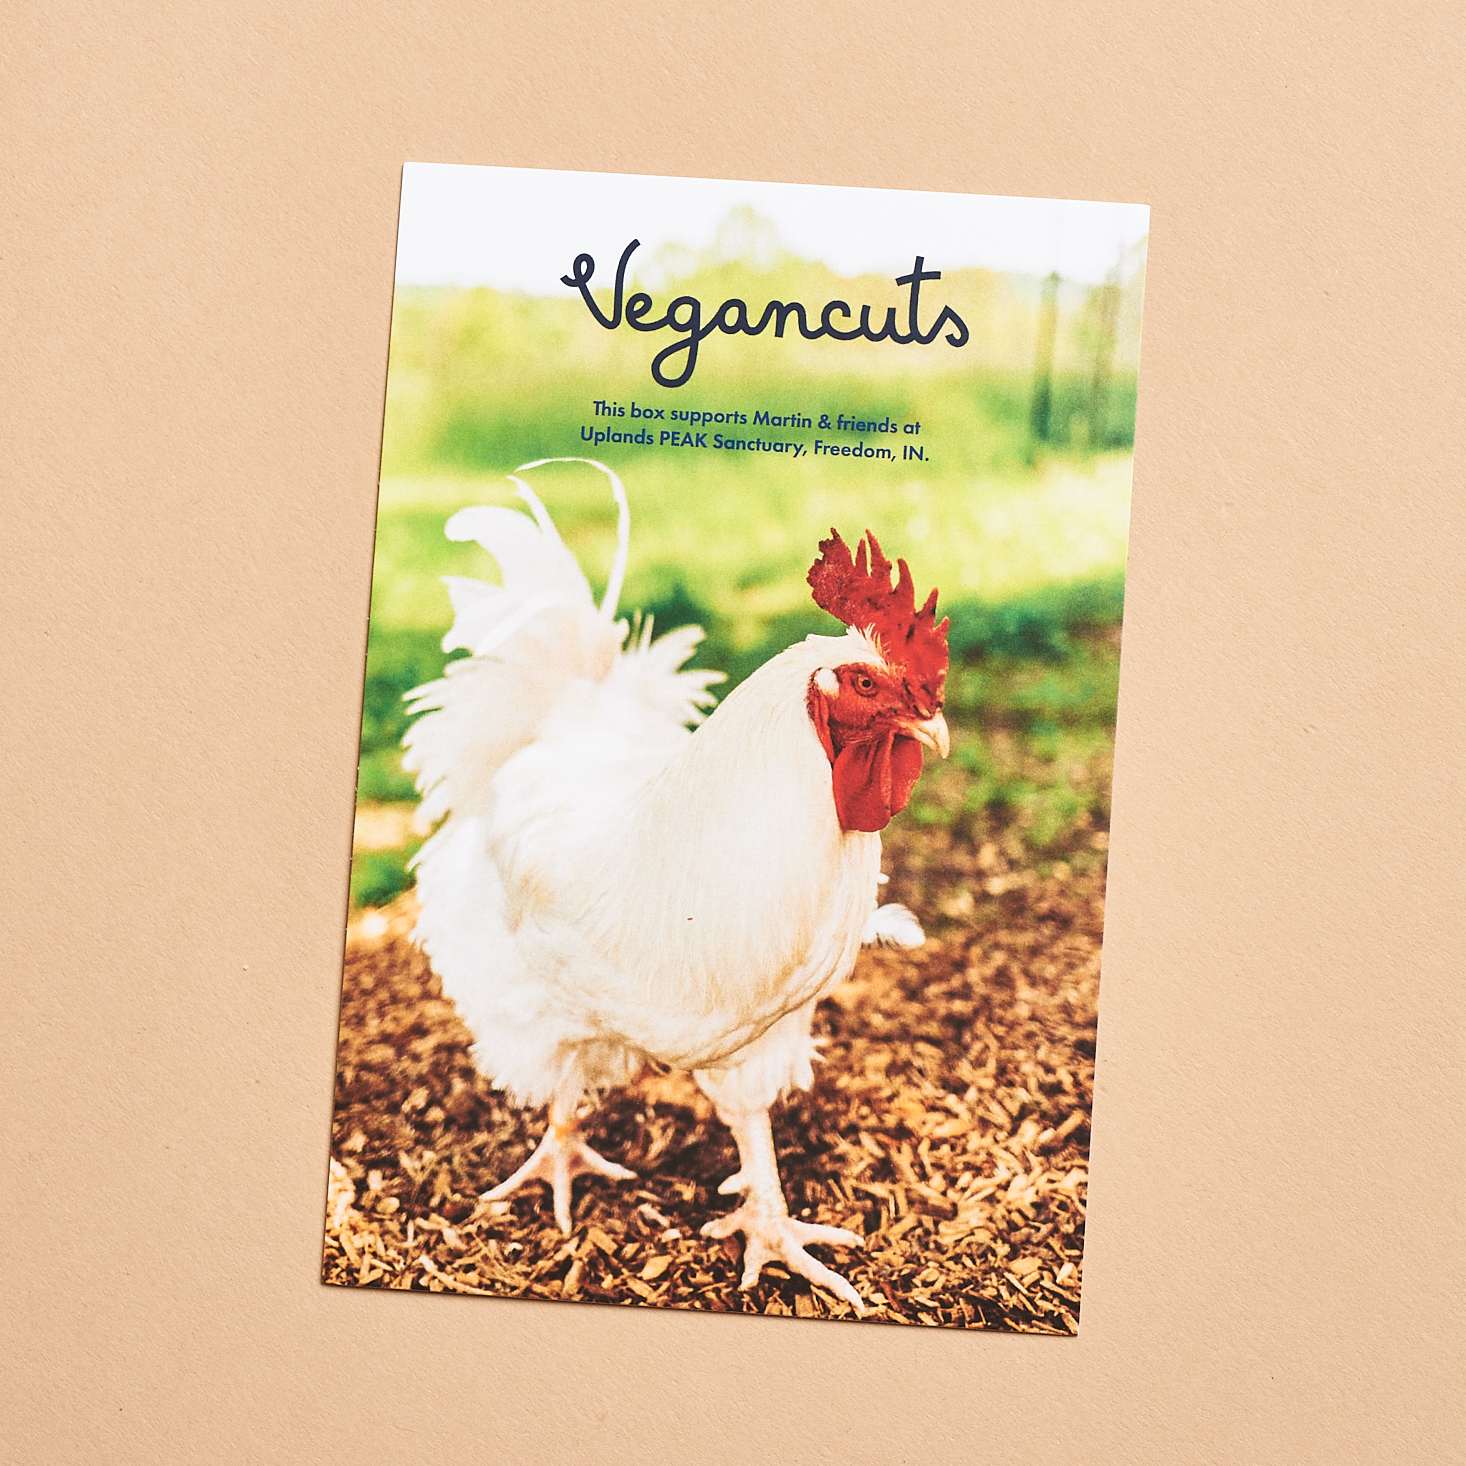 vegancuts card showing a white chicken